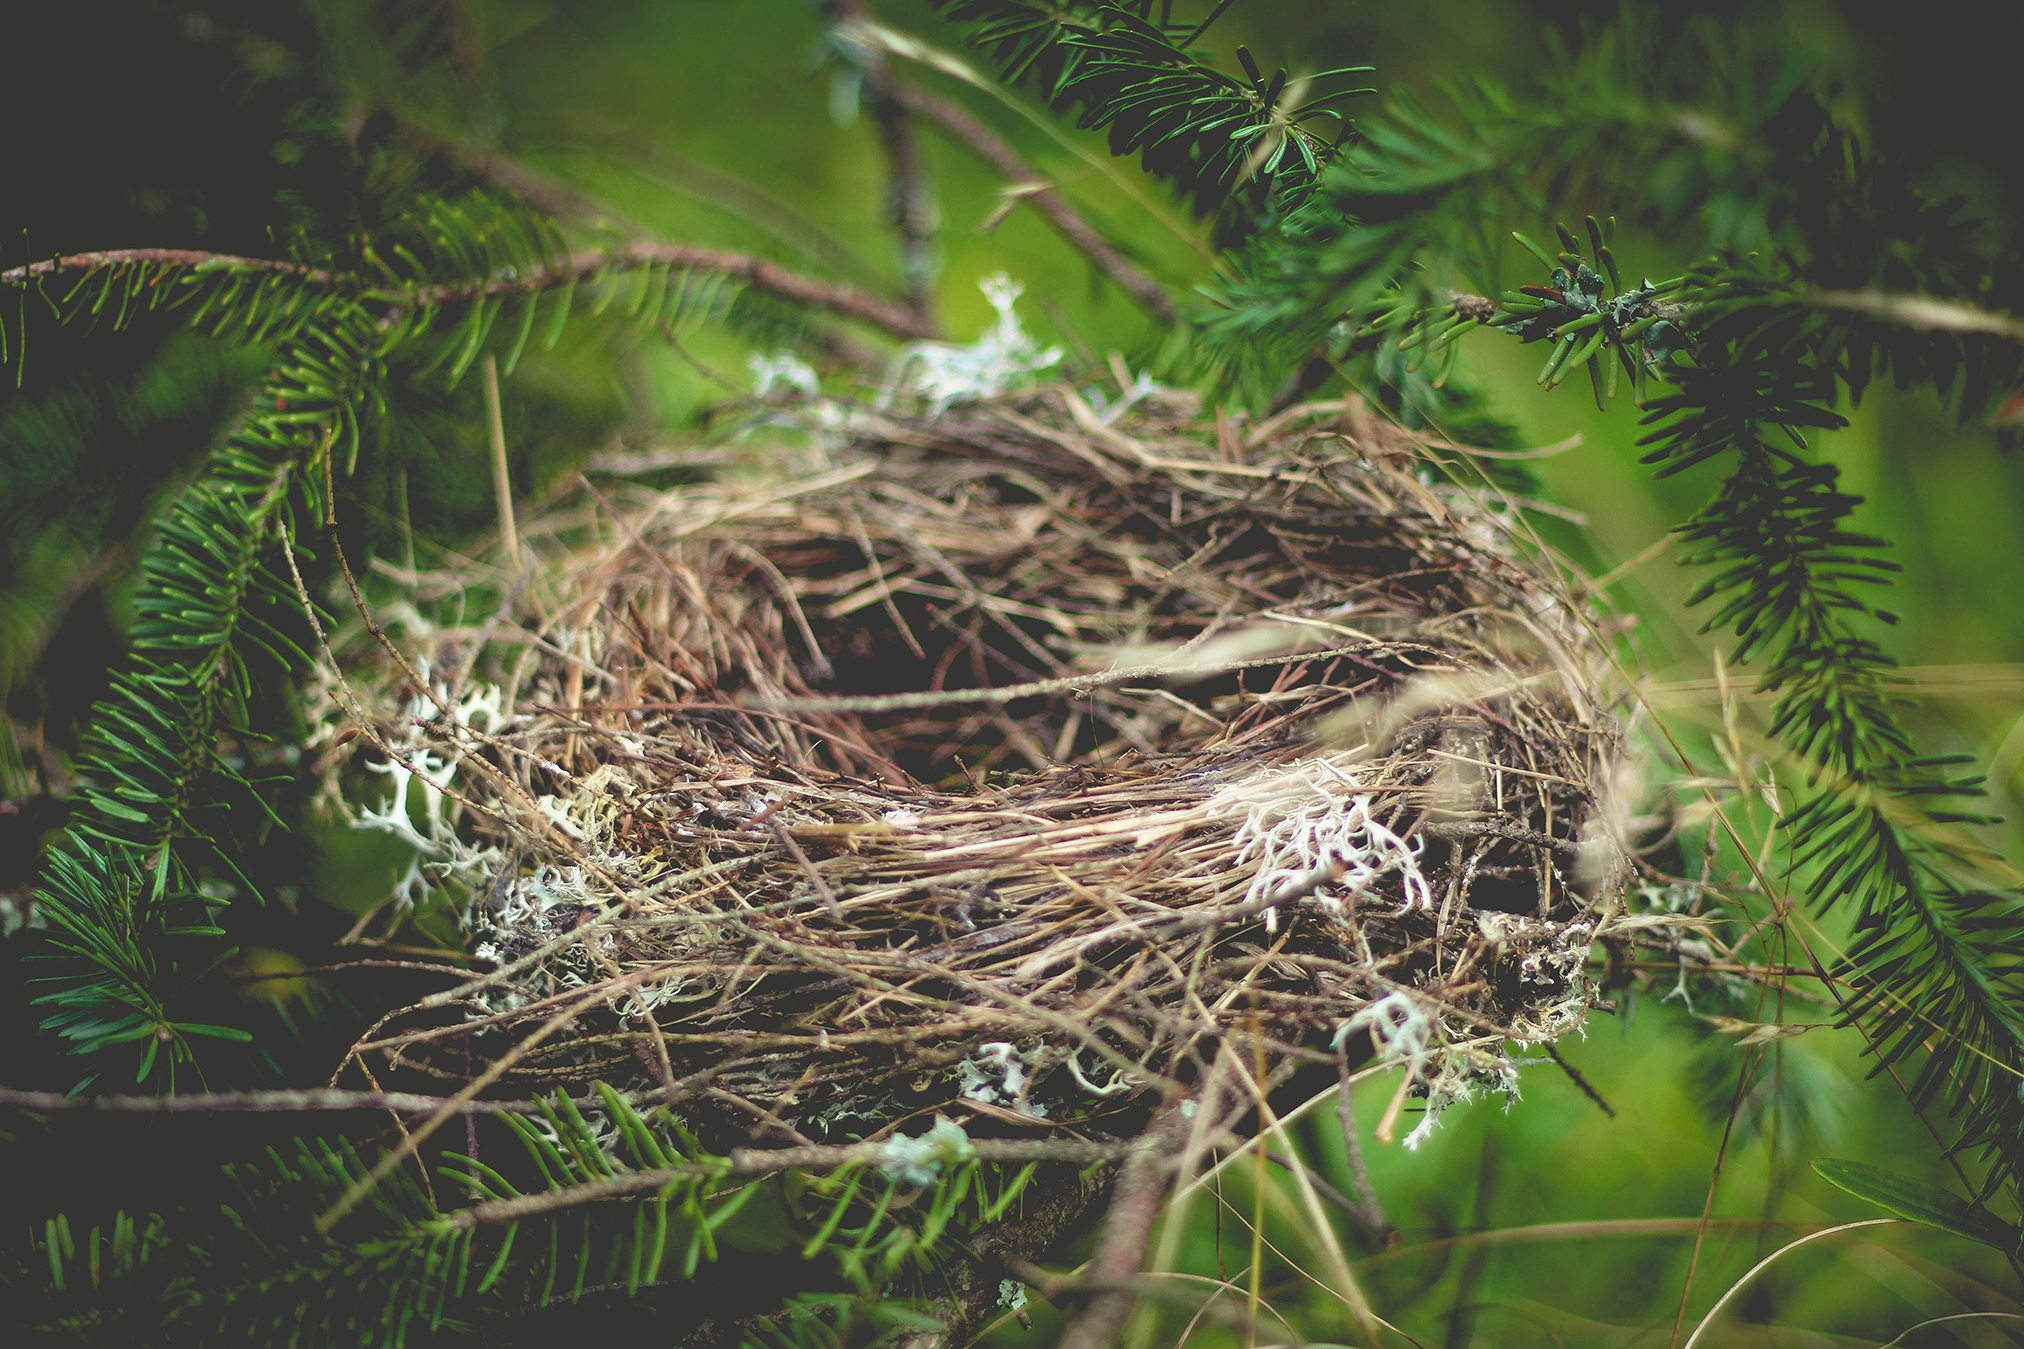 How To Tell If A Bird's Nest Is Being Used